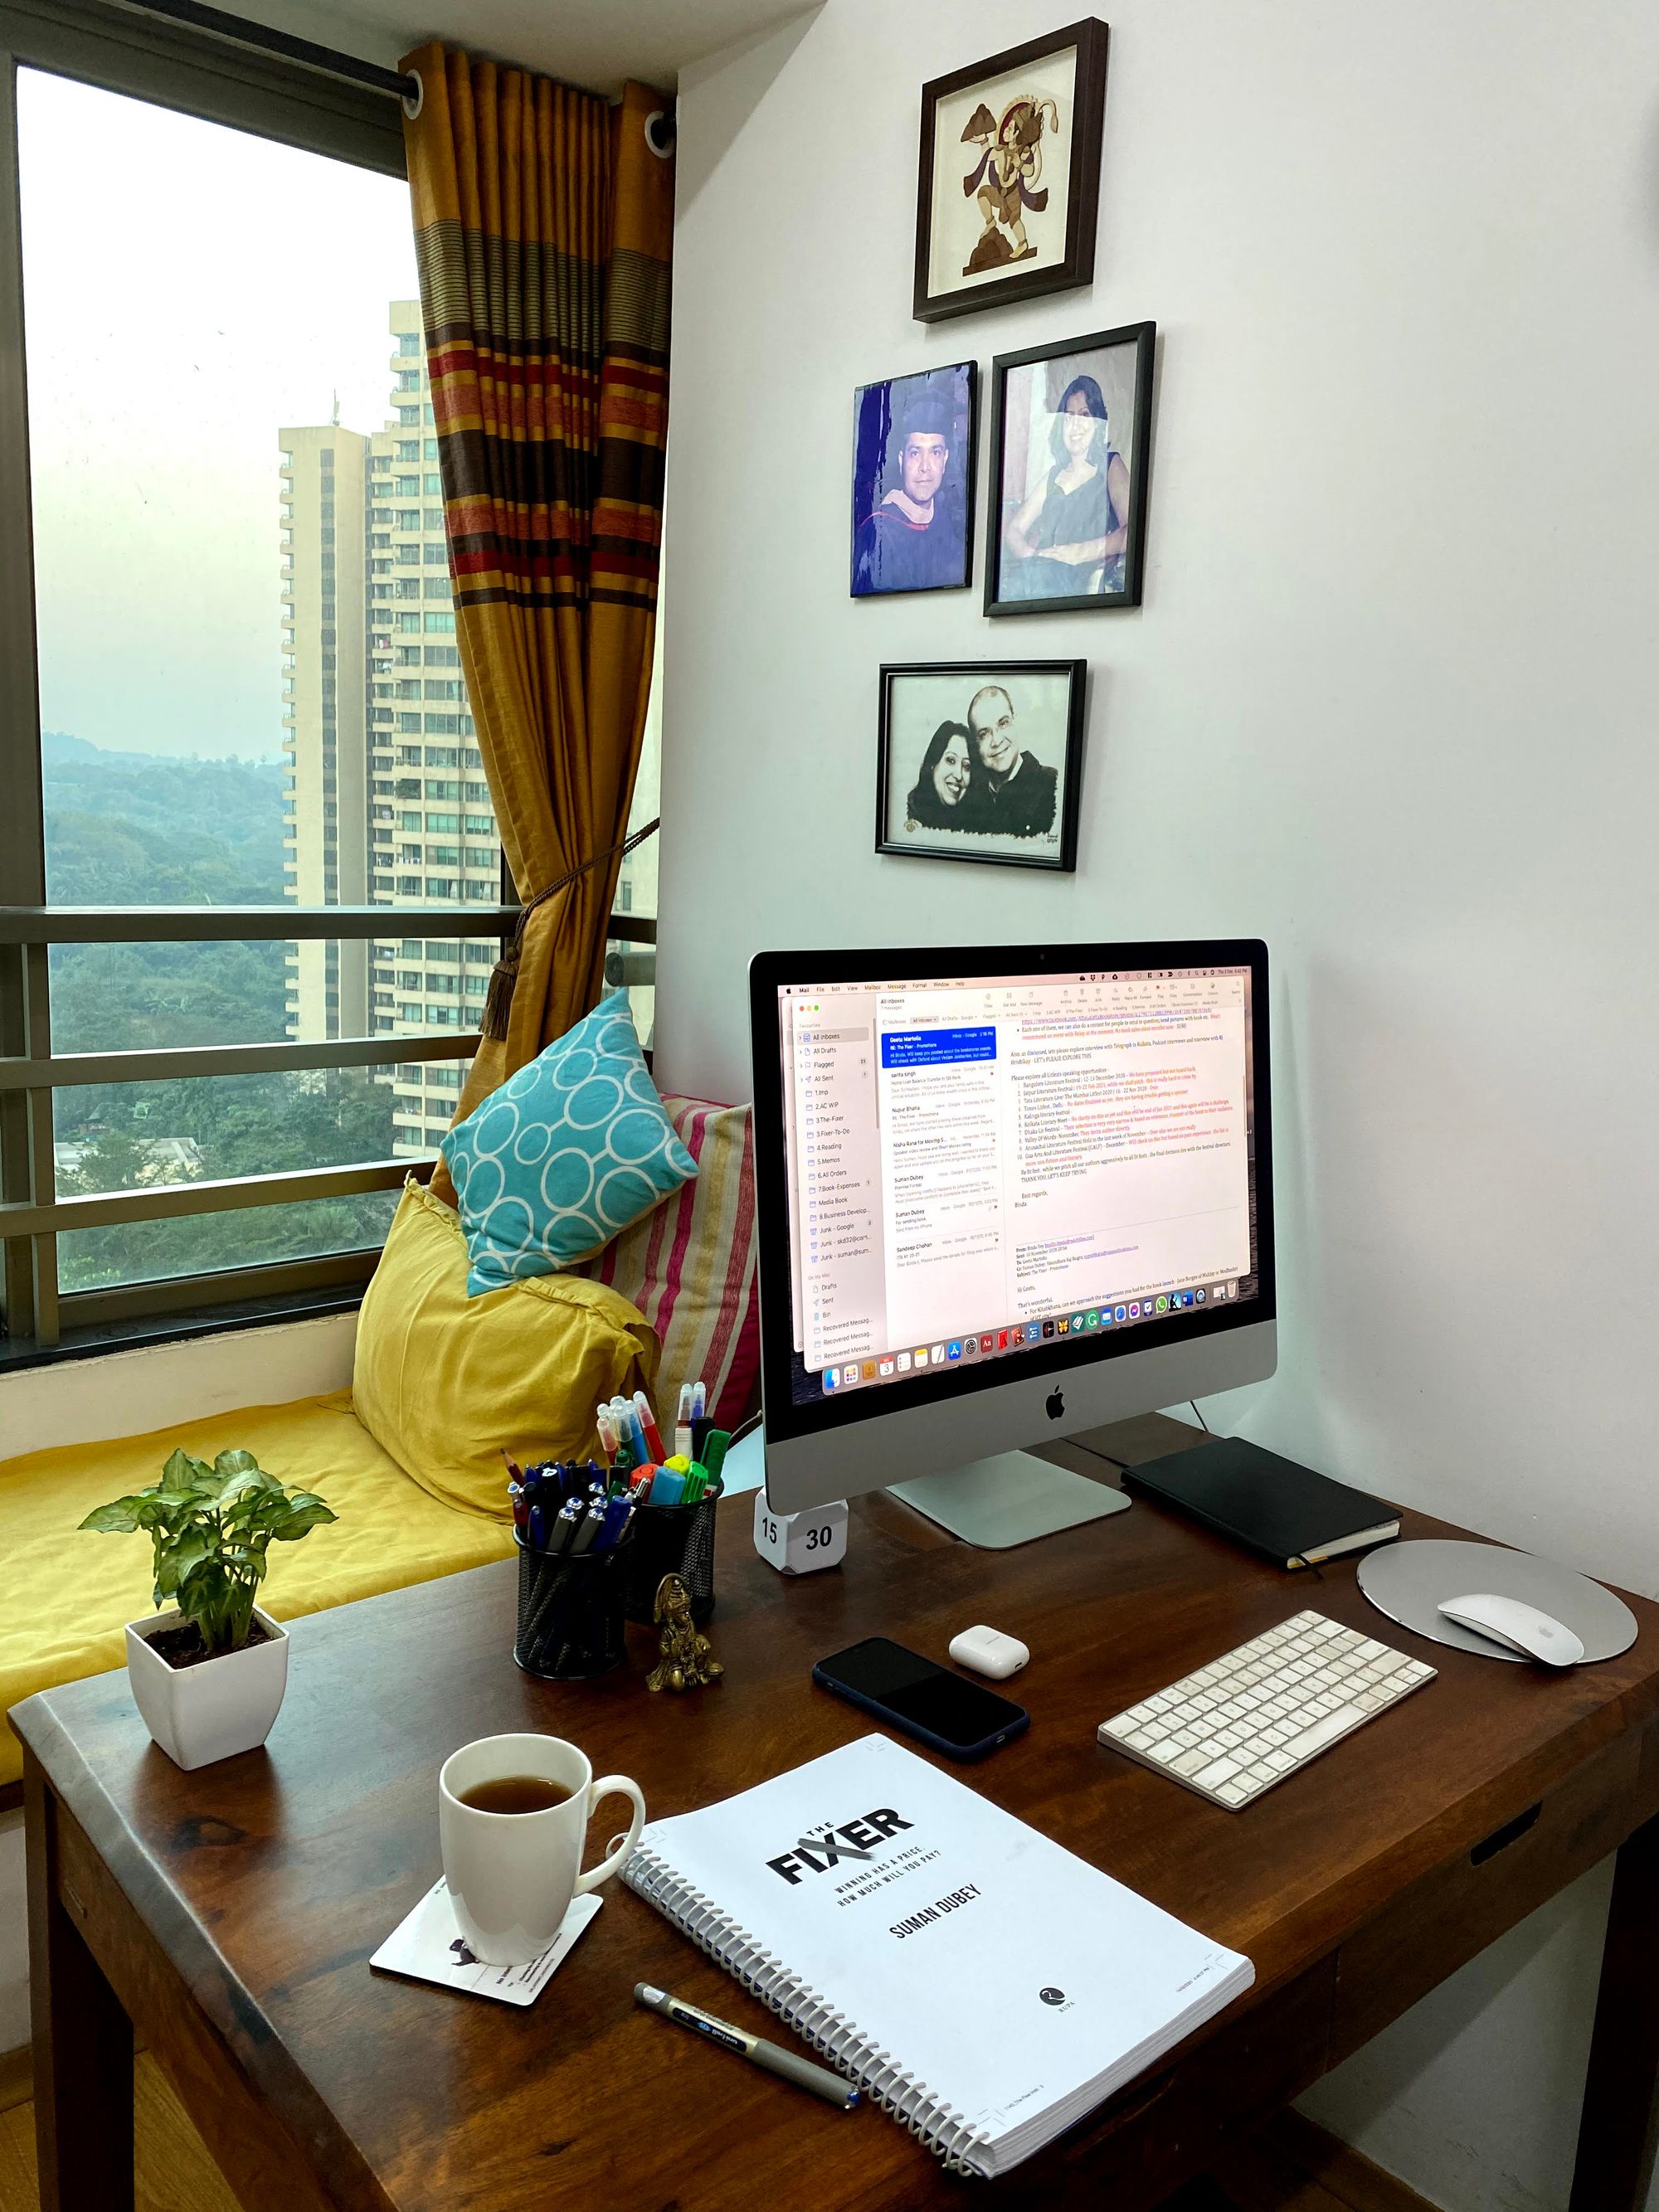 Image showing Suman Dubey’s workplace: a wooden desk with an iMac, a mug and the manuscript for “The Fixer”.  